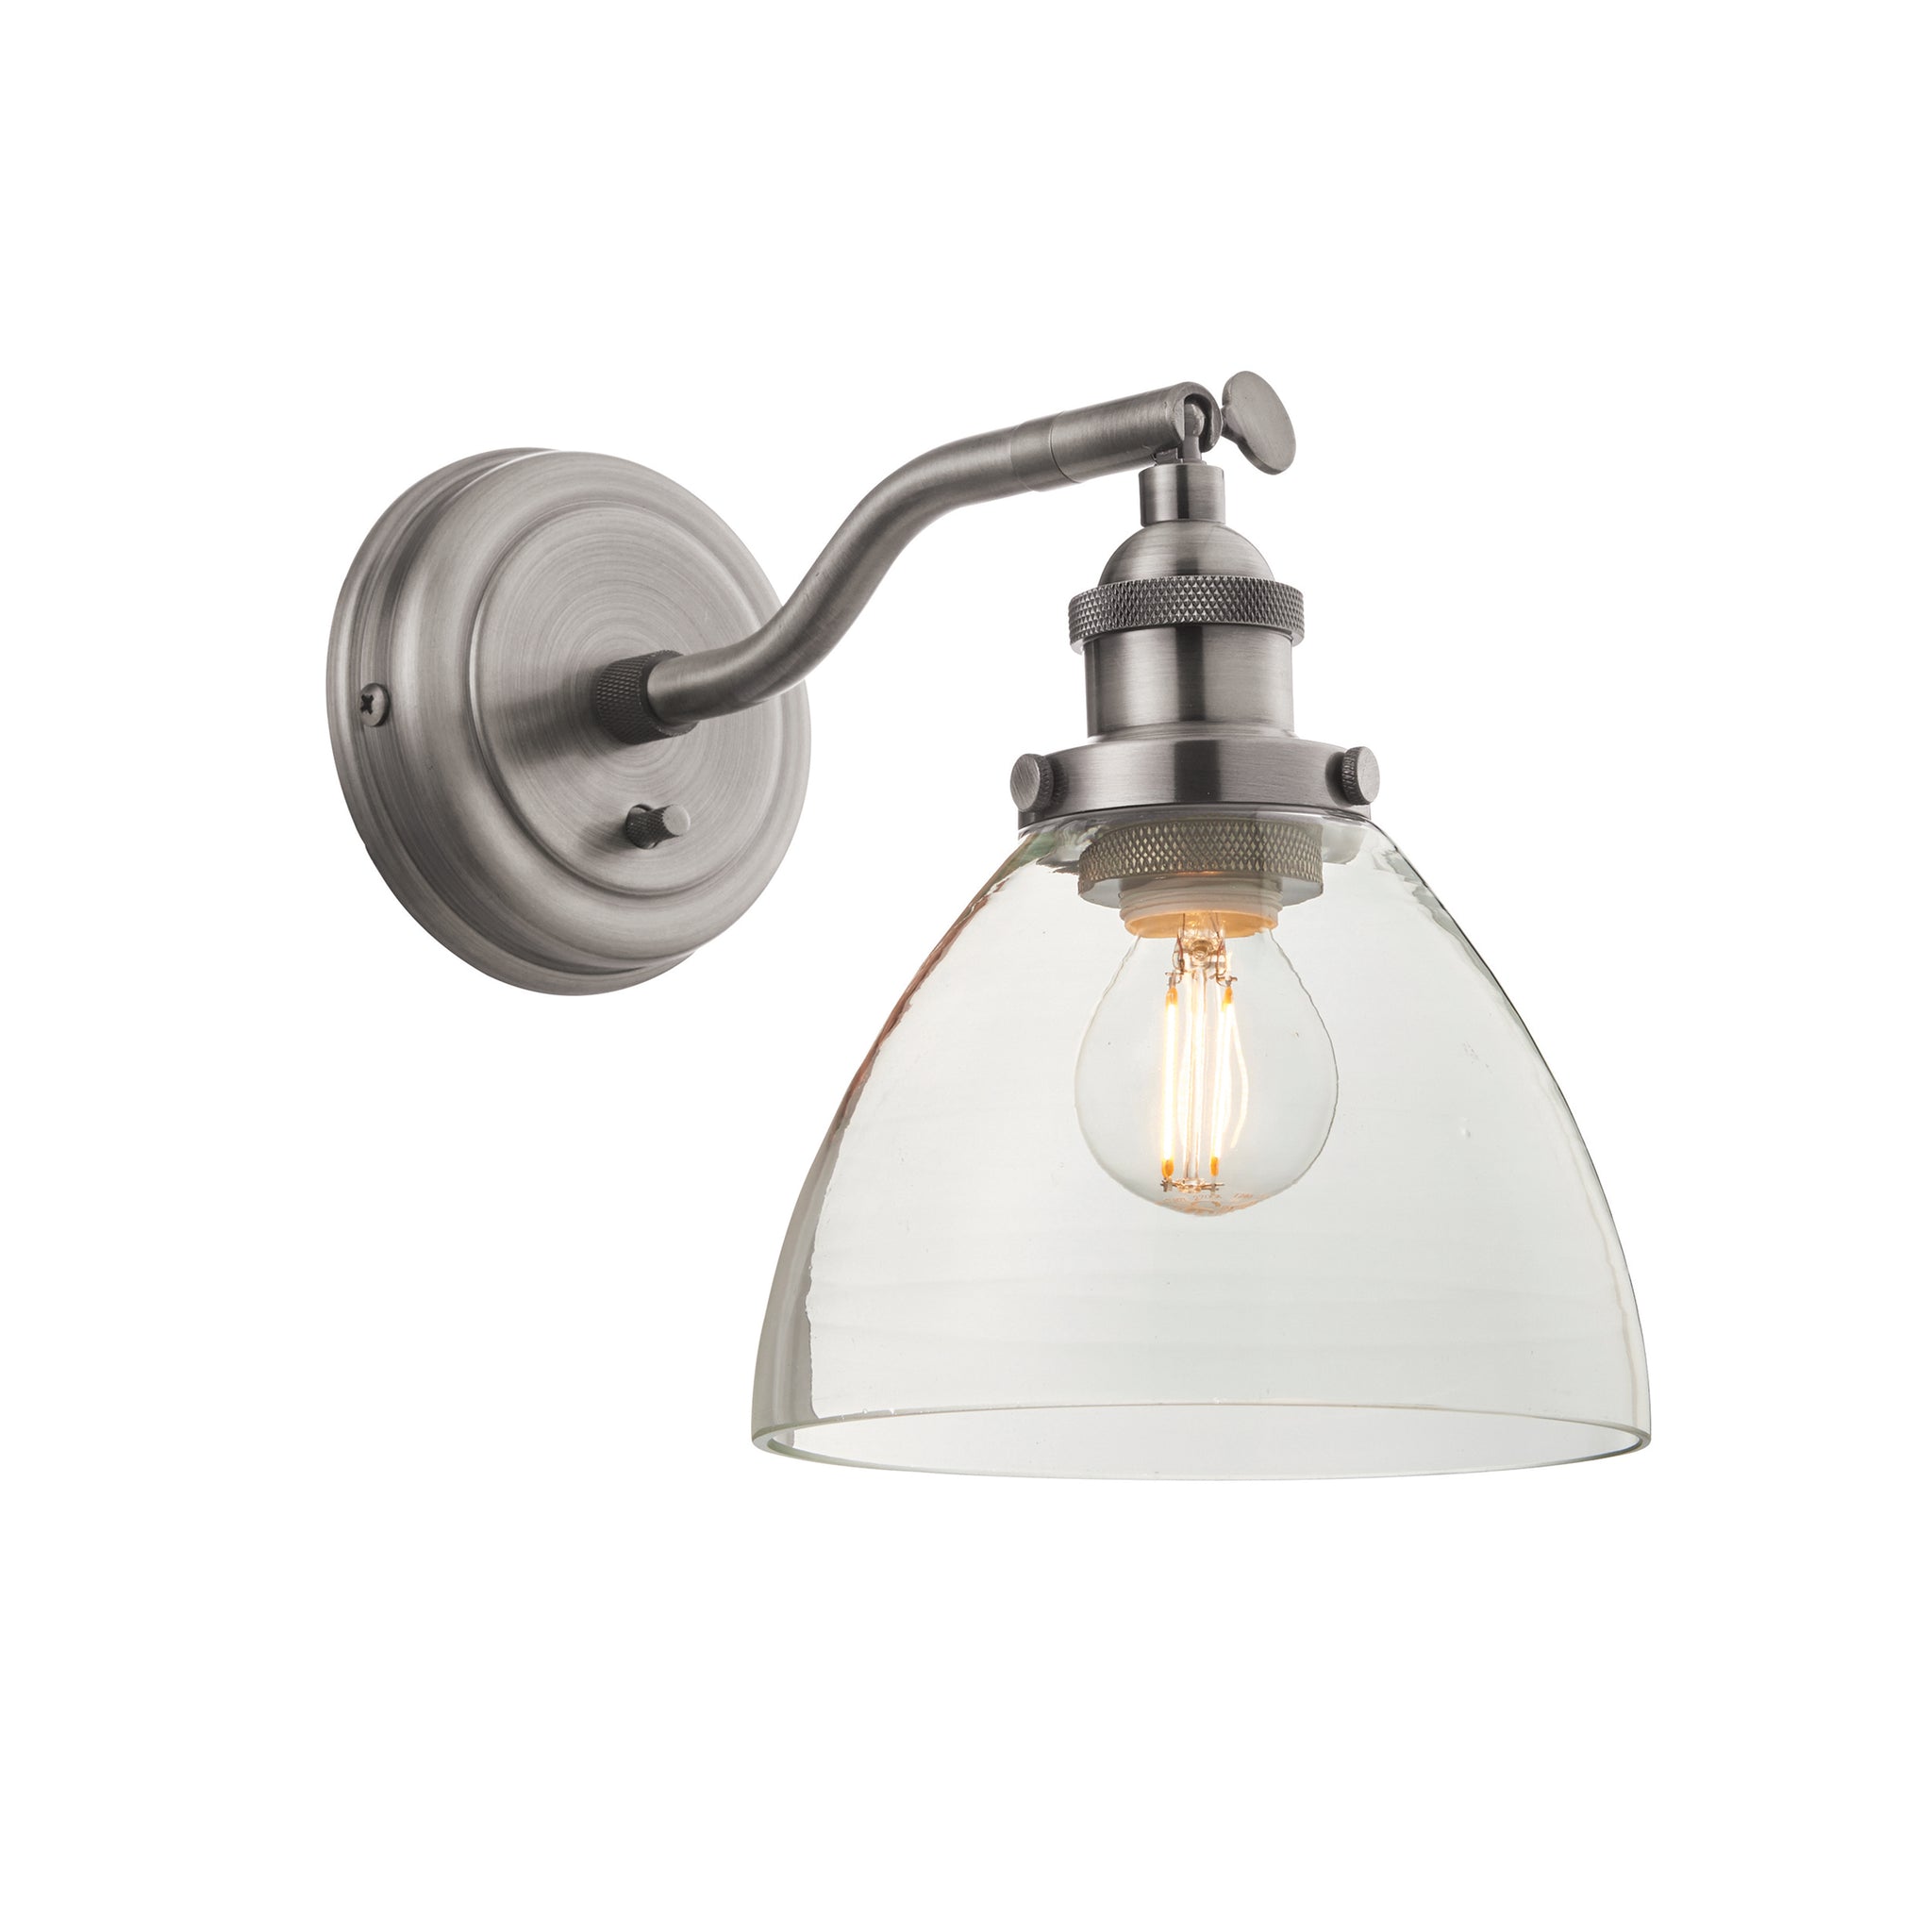 Hanson 1 Wall Light Brushed Silver